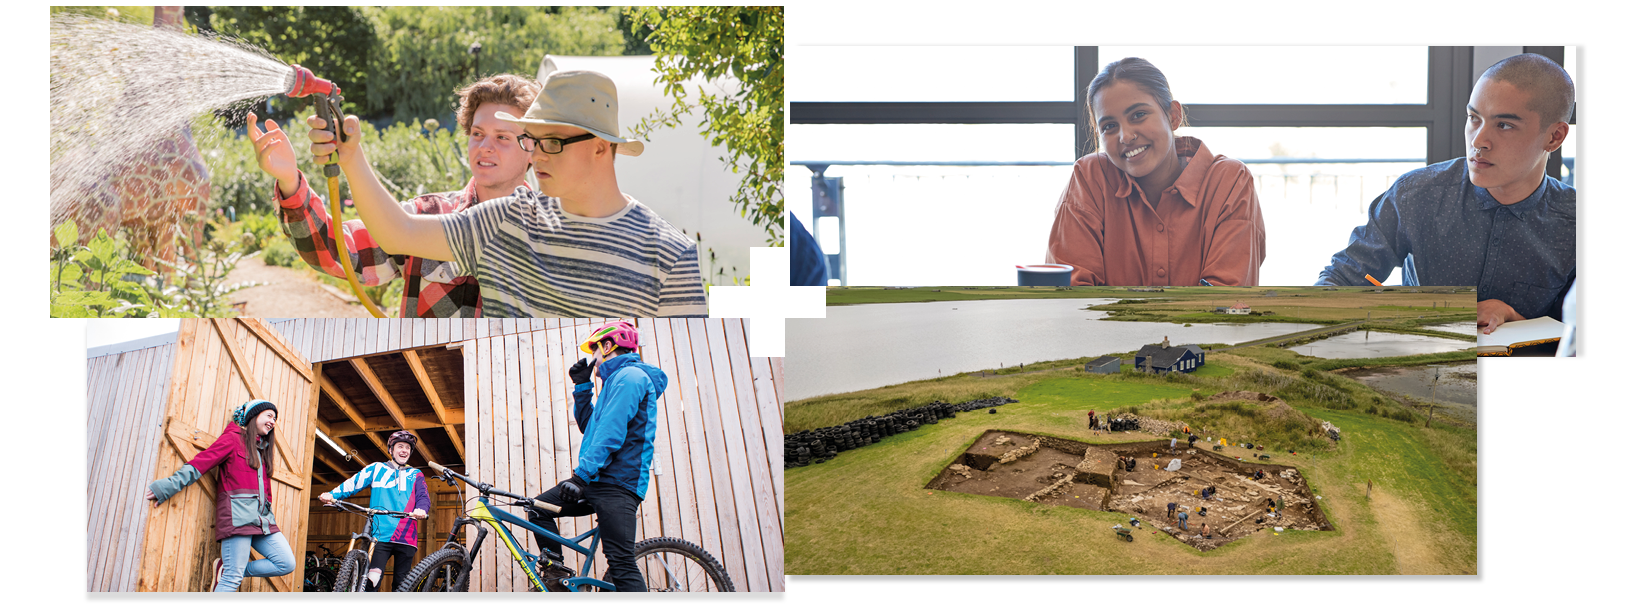 Collage of 4 | Students watering plants | Student sitting in a classroom | Students chatting while sitting on bikes | Archaeological dig